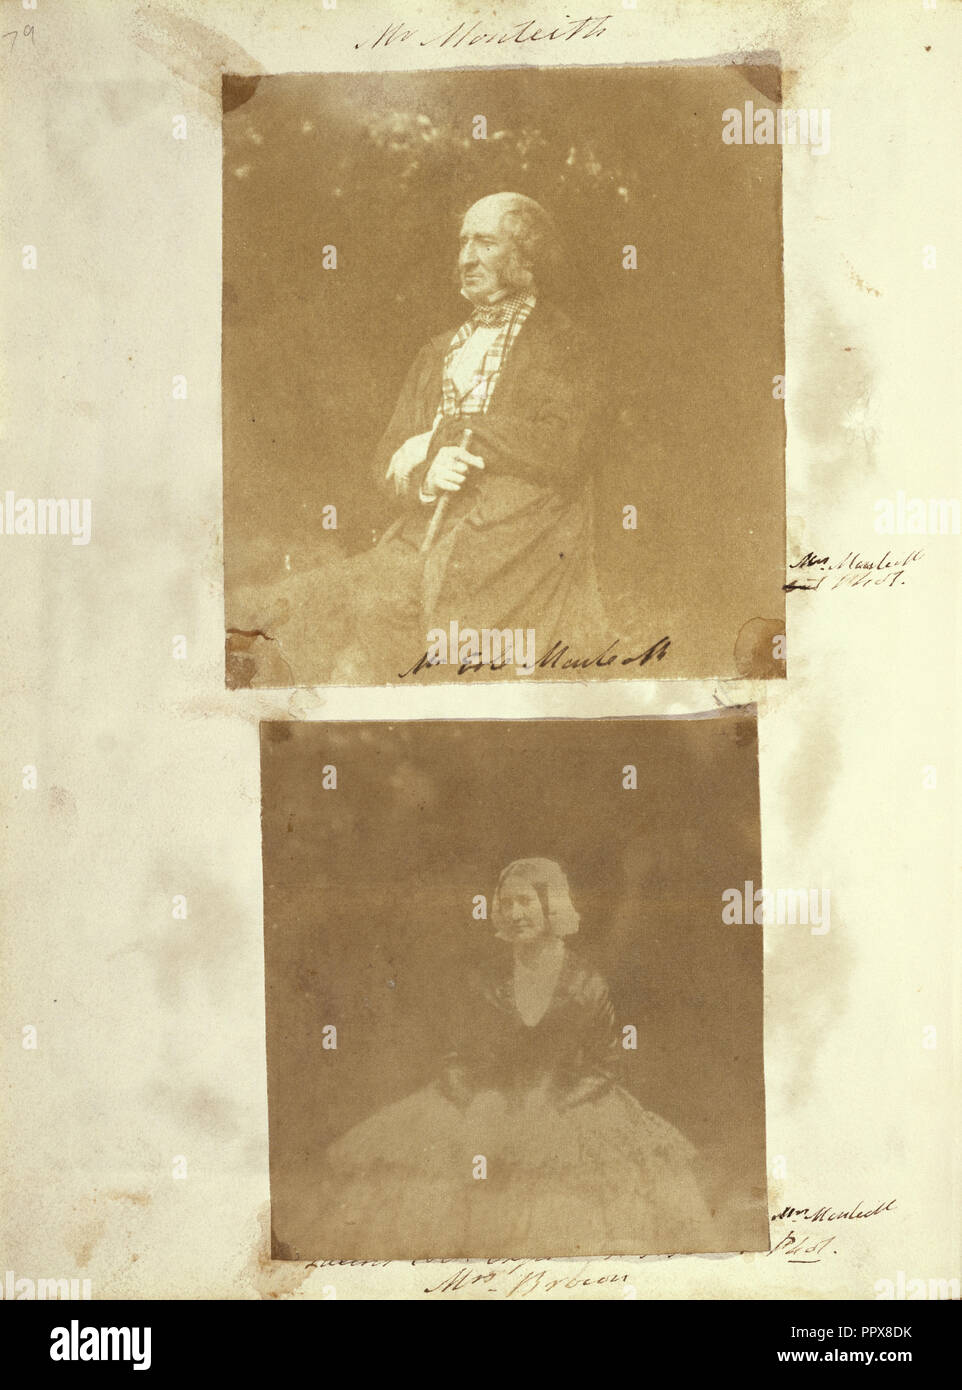 Mrs. Brown; Frances Monteith, British, active 1840s, about 1845; Salted paper print from a Calotype negative; 9.2 x 8.6 cm Stock Photo